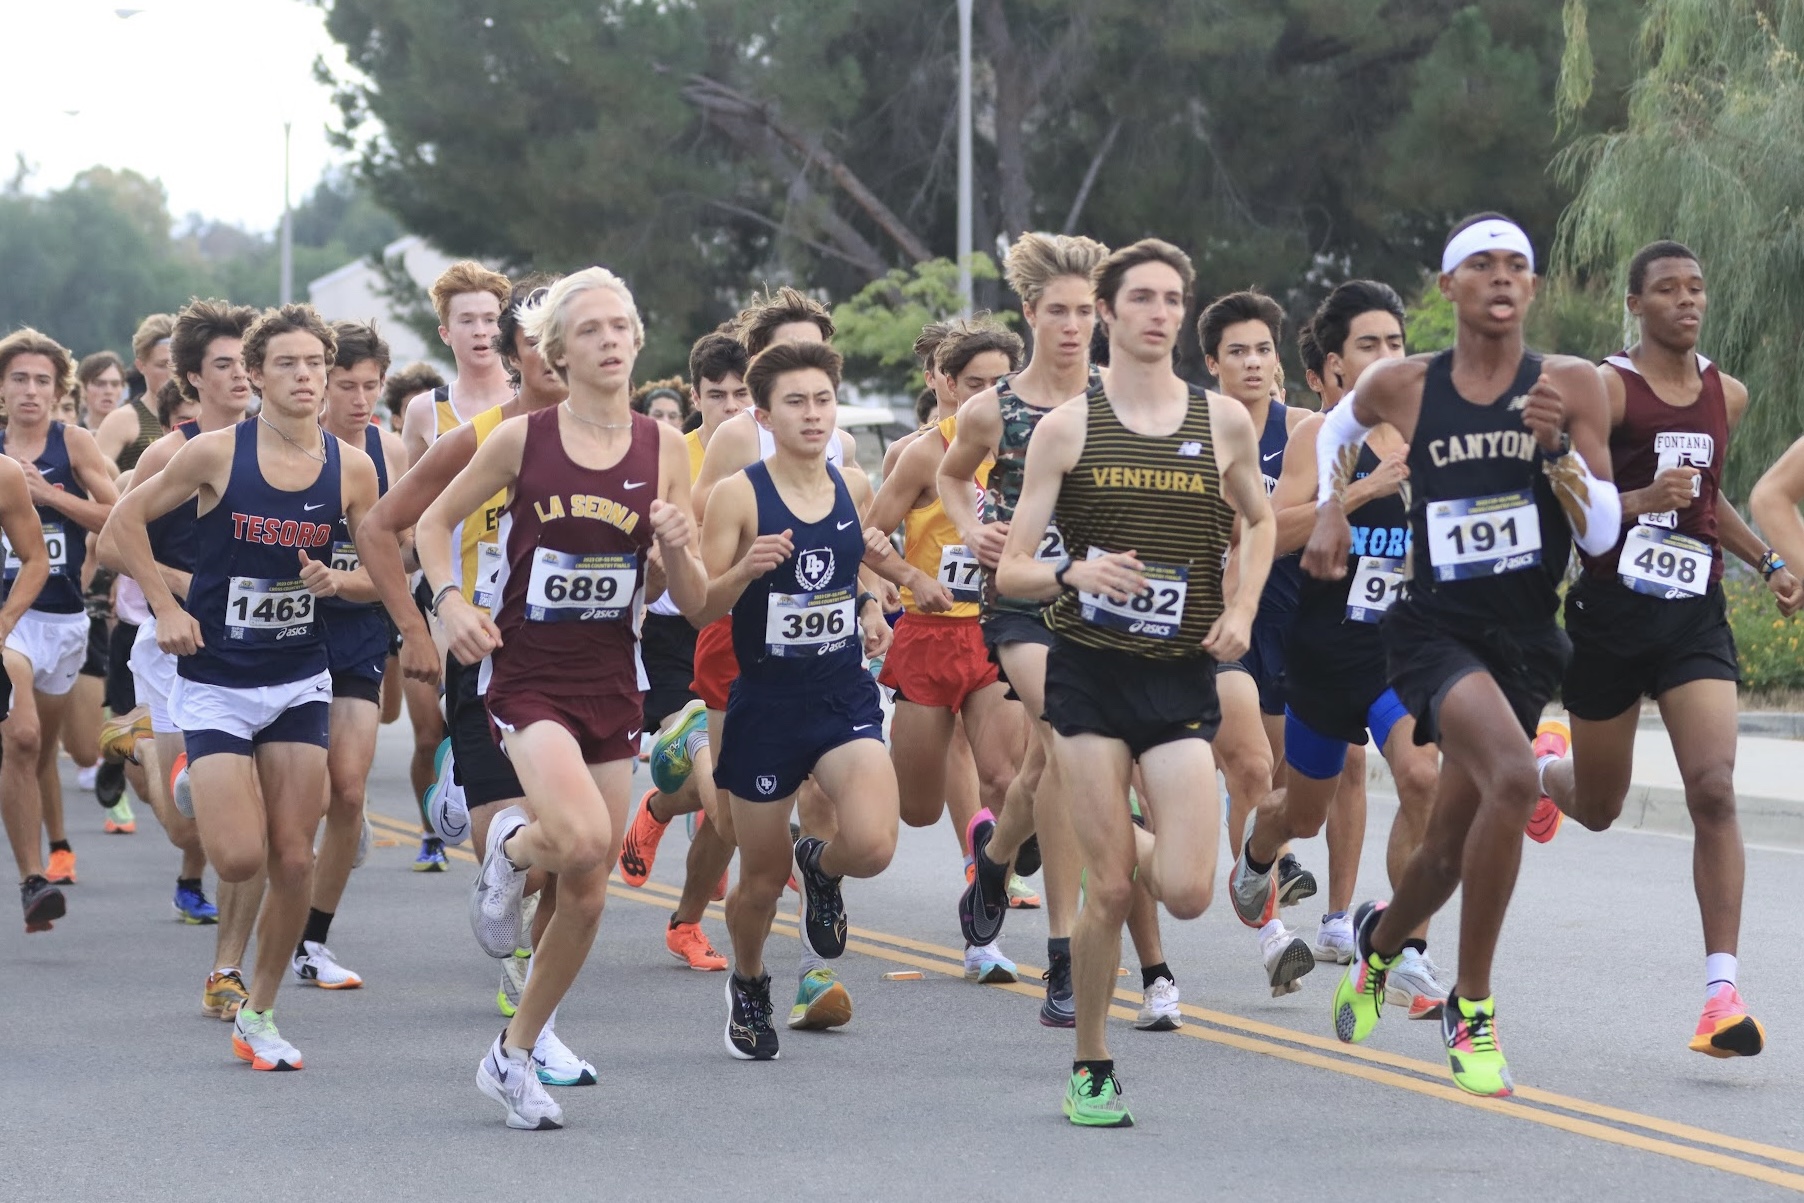 Eamon Gordon (11) sprinting alongside various other runners on the Mt. Sac track.